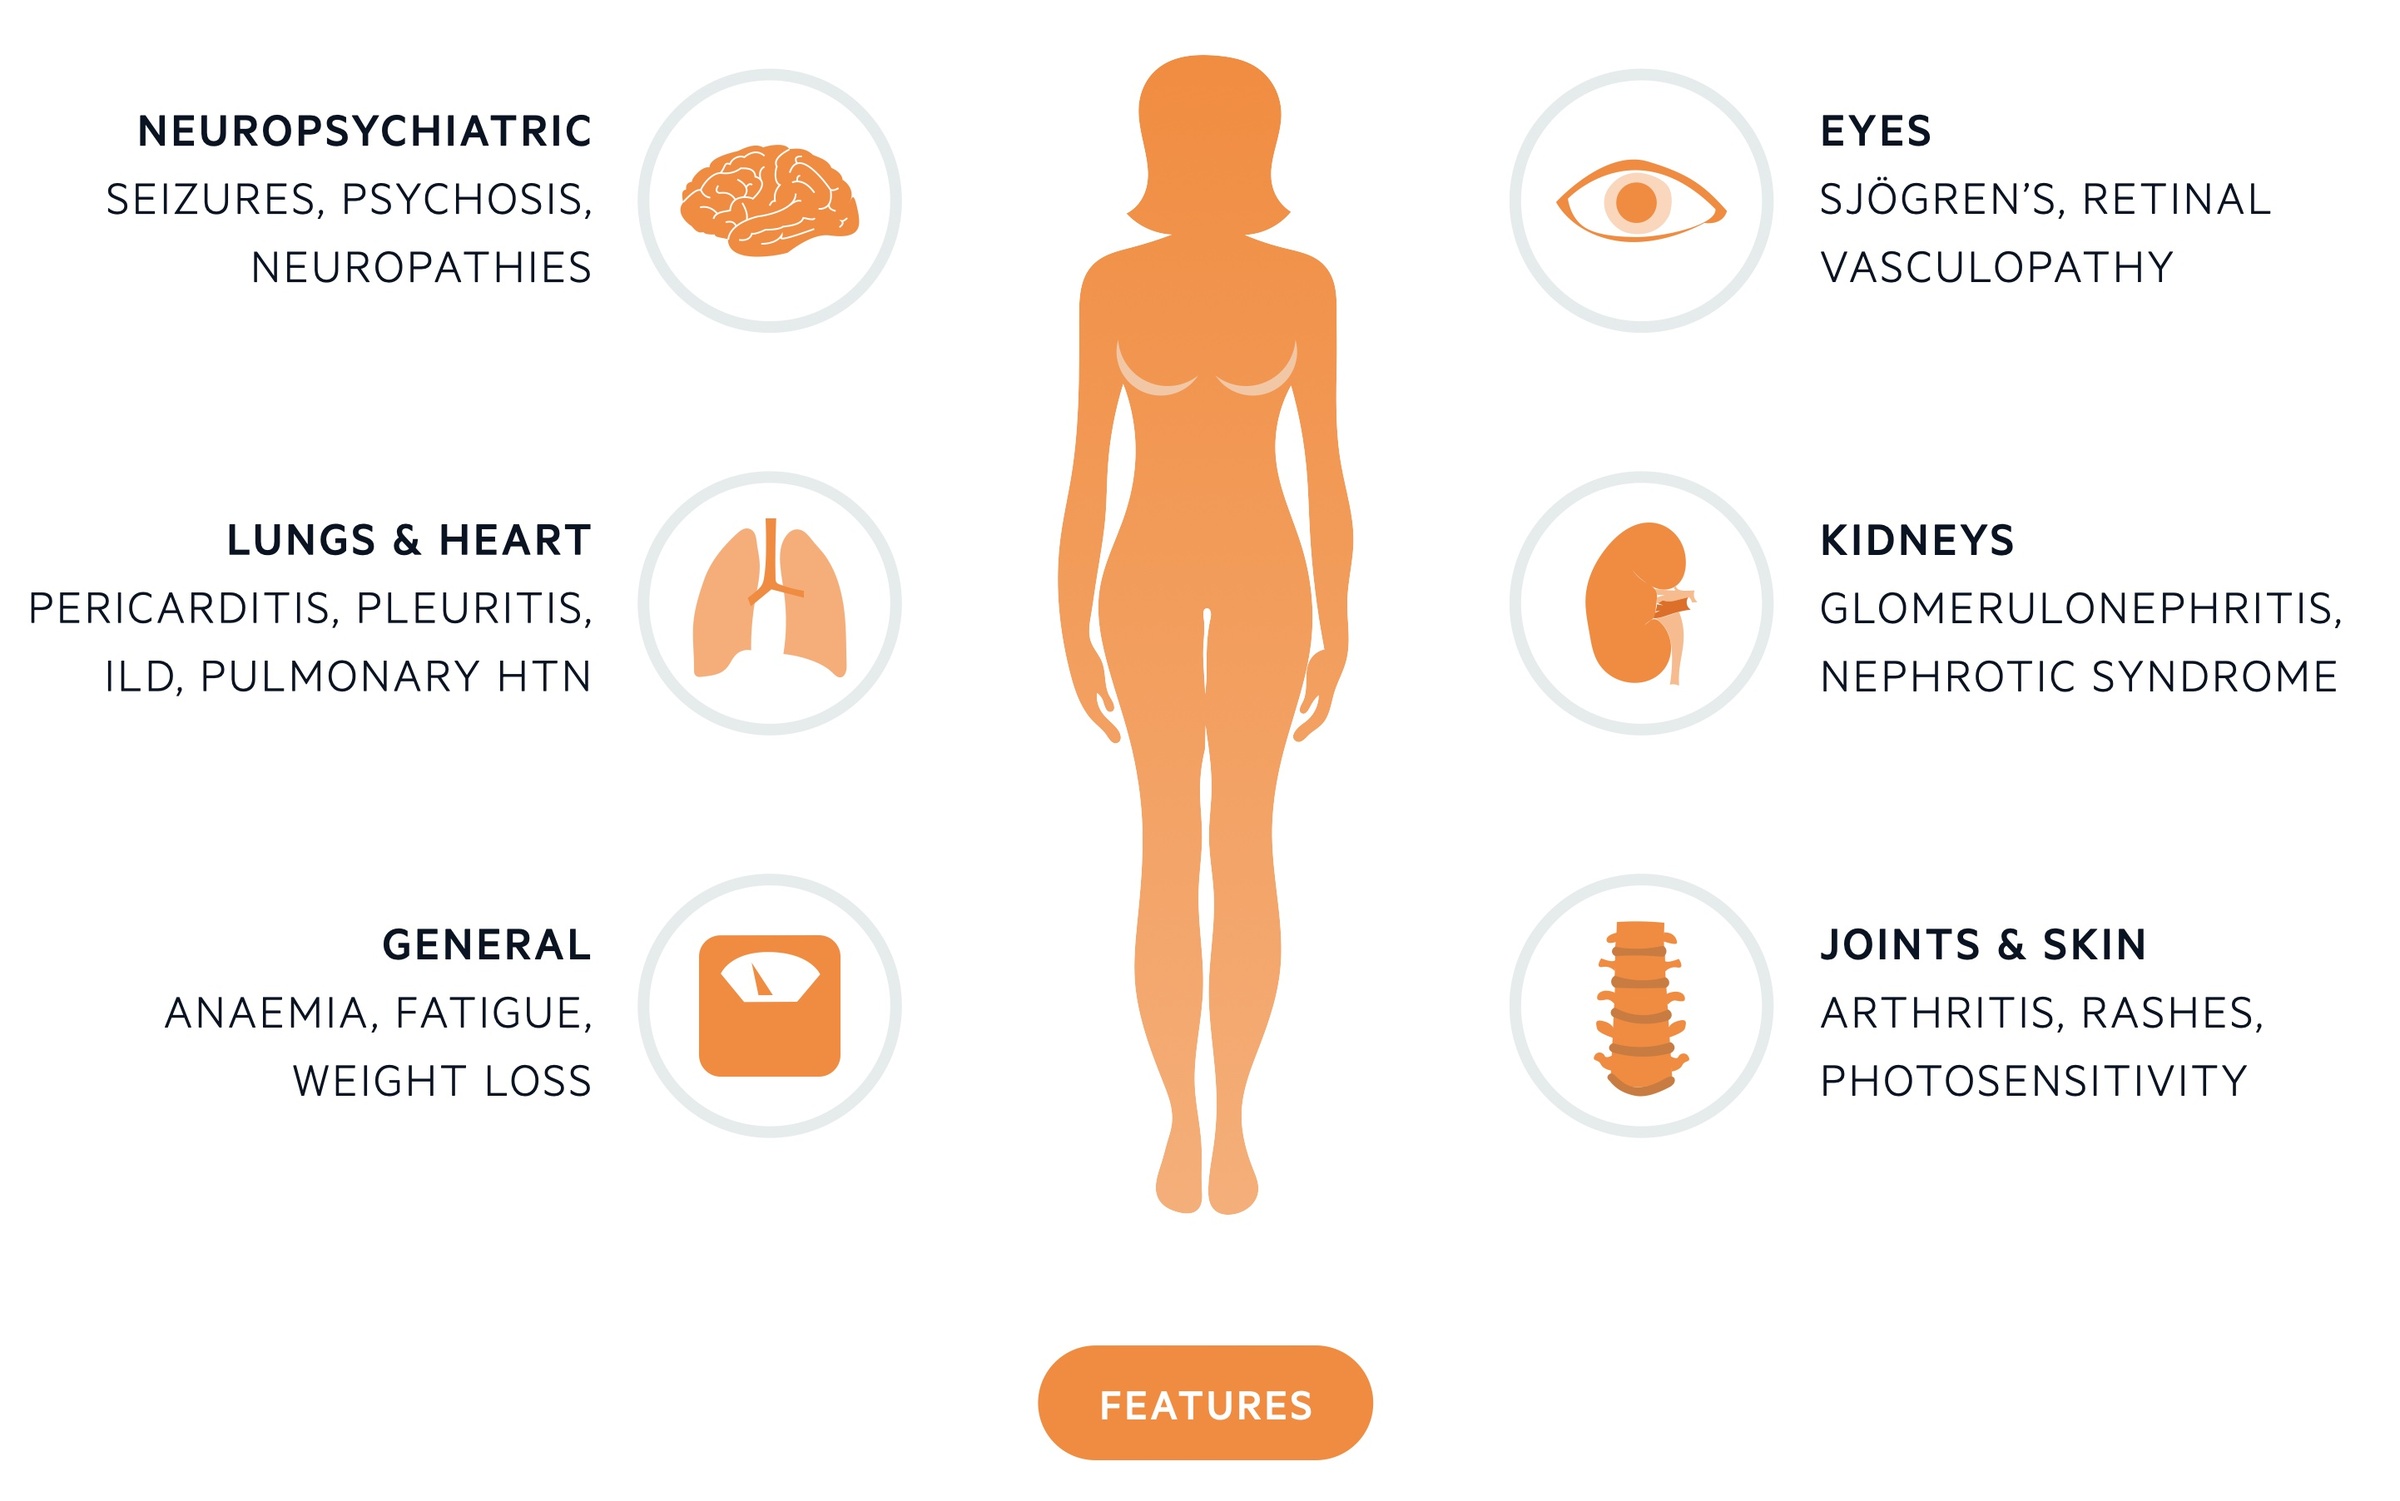 Clinical features of systemic lupus erythematosus (SLE)